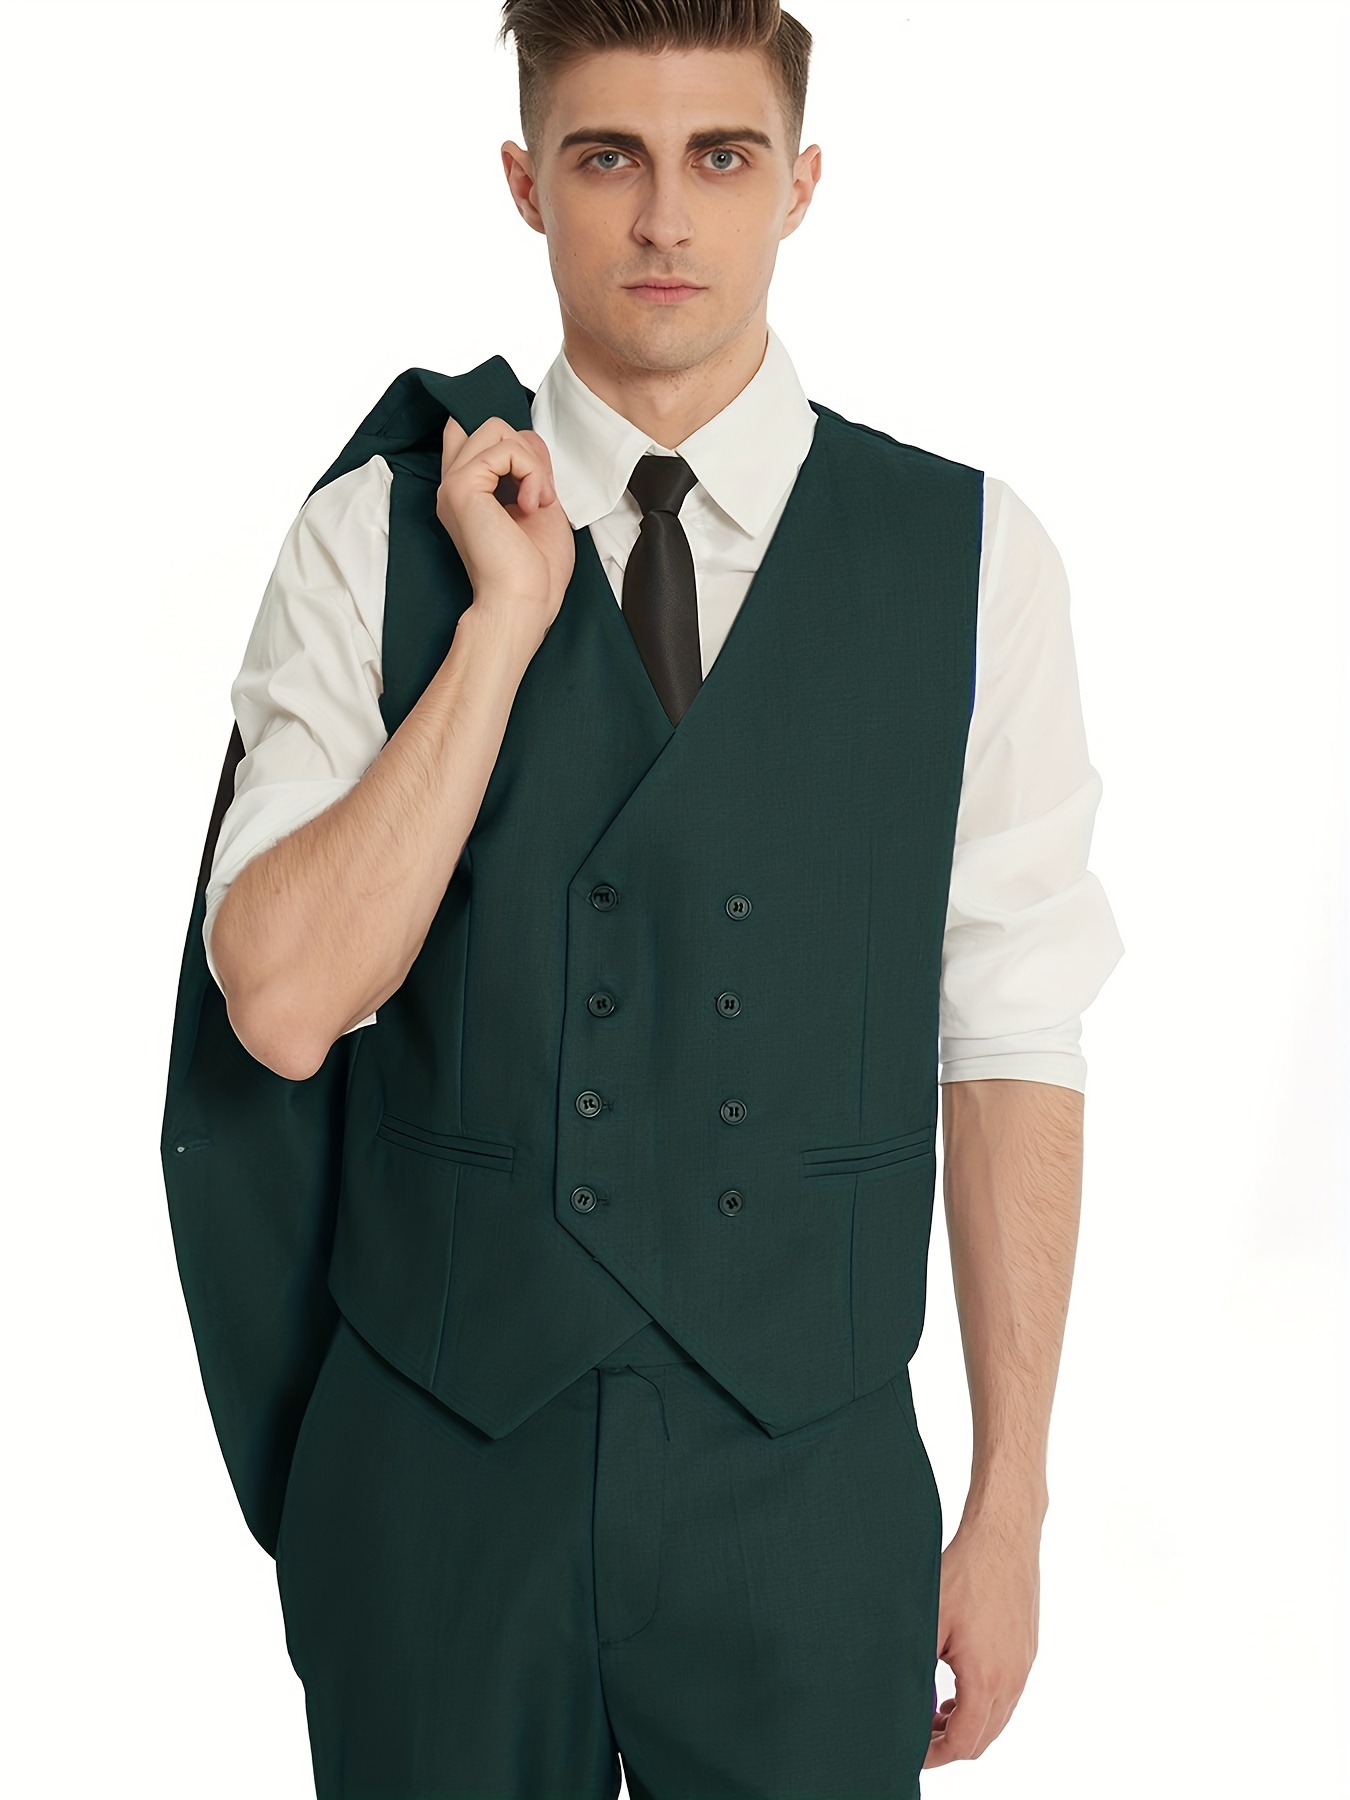 Male Suit Full Emerald Green Suits For Men Mens Clothing Slim Fit